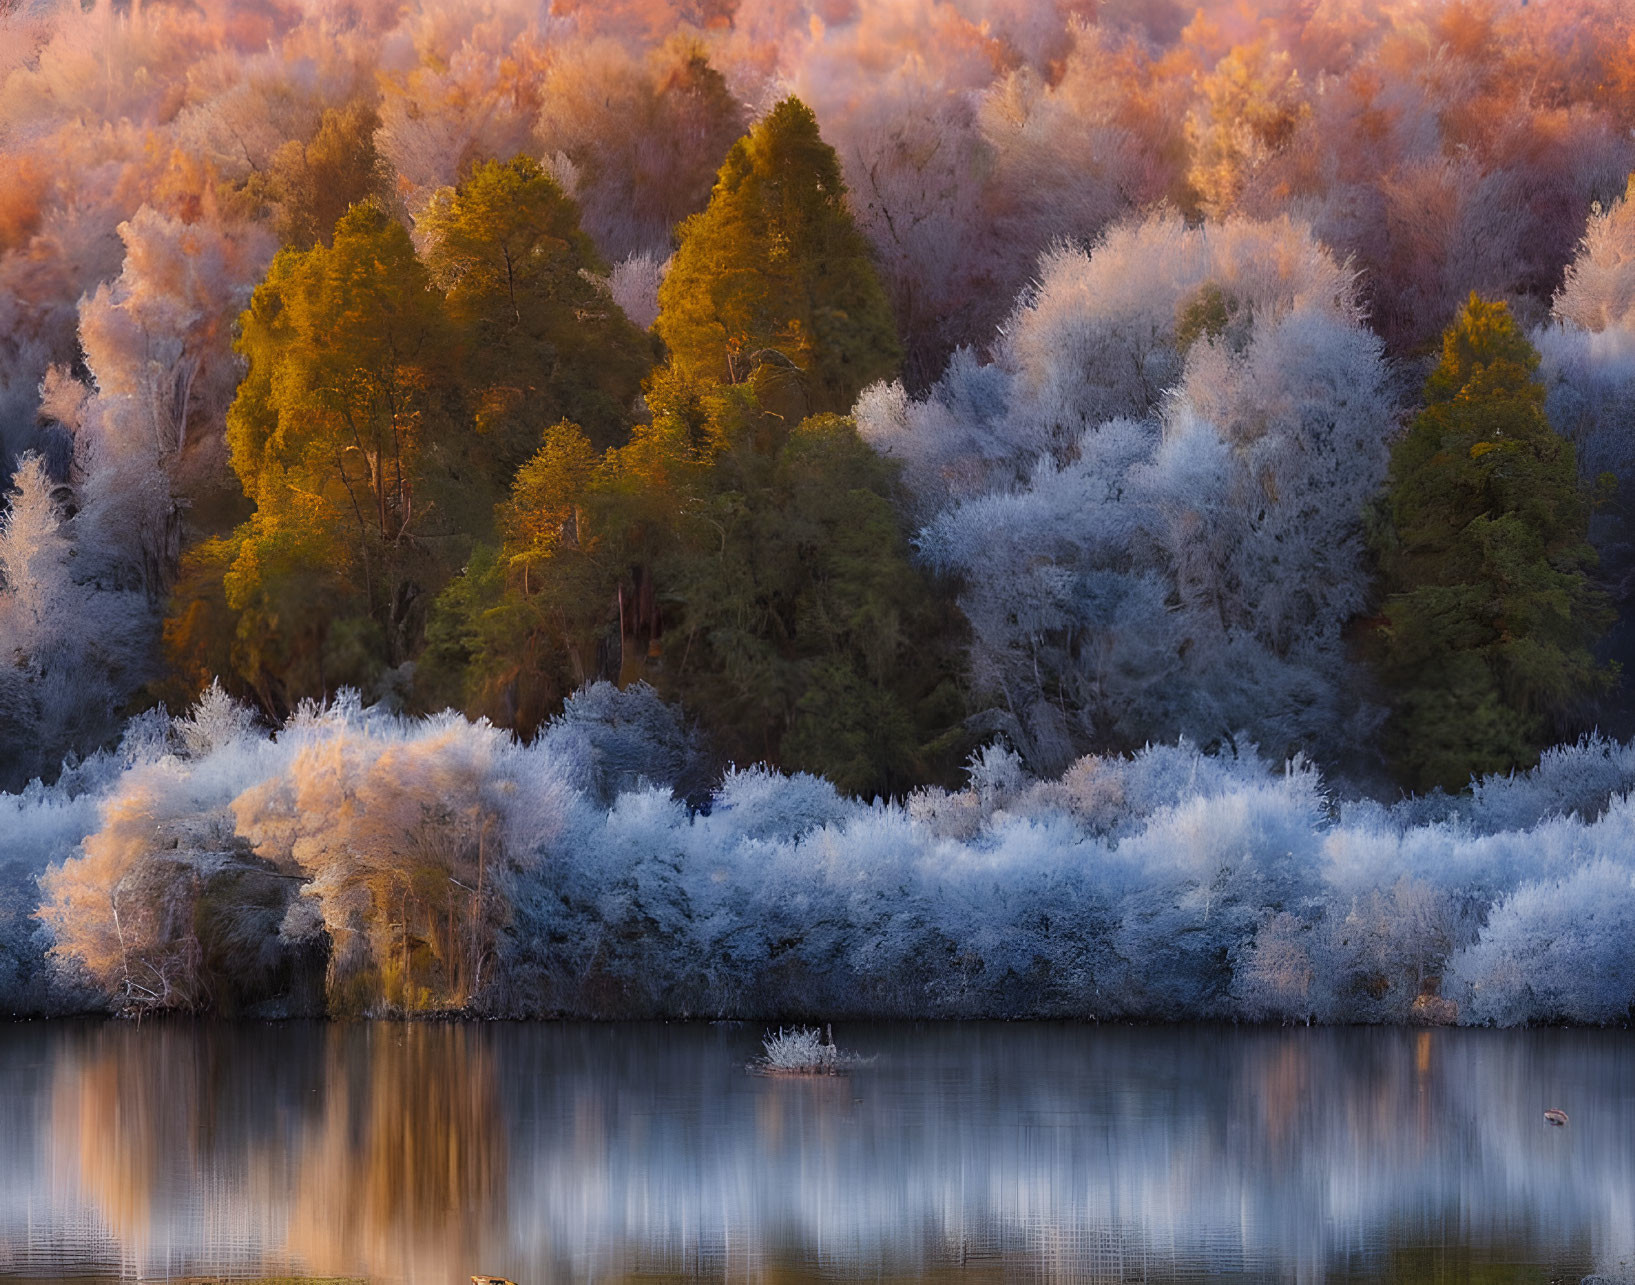 Tranquil autumn scene: trees, lake, golden and frosted foliage in soft light